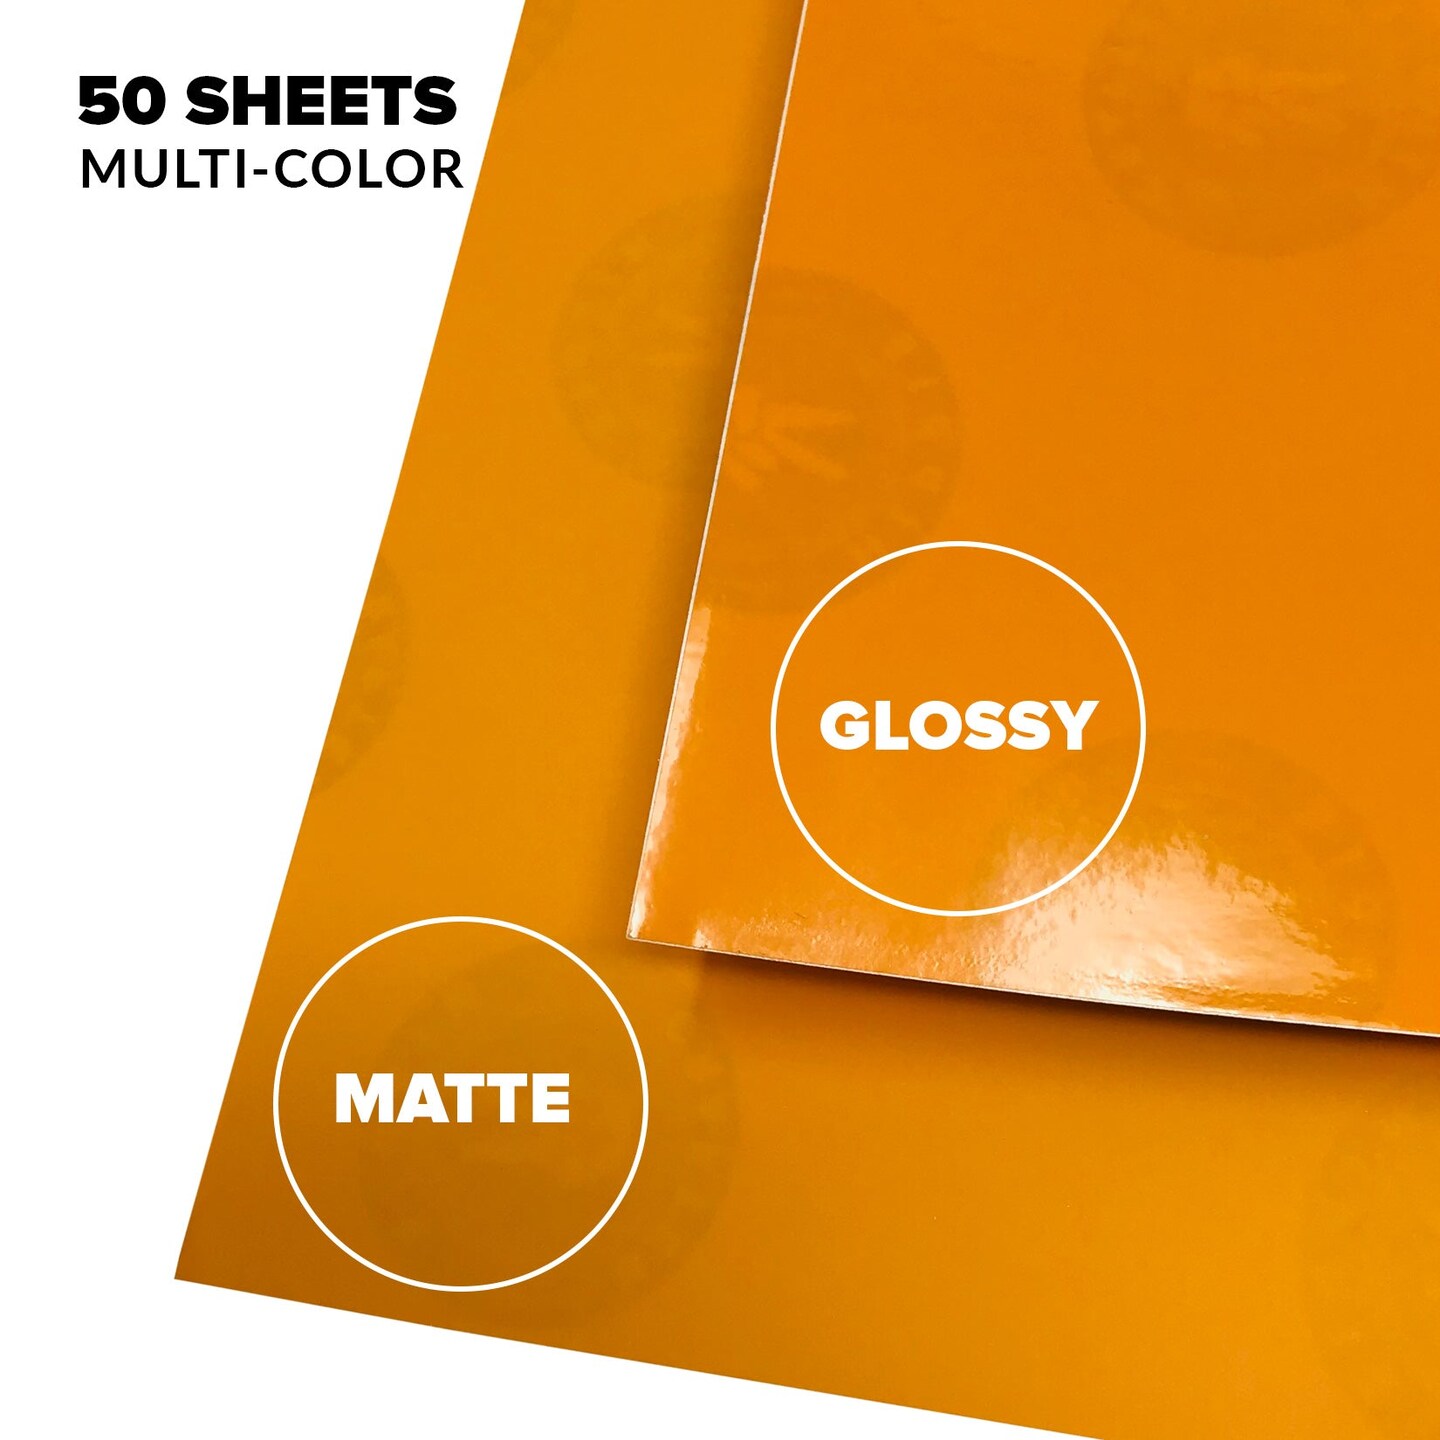 50 Pack Adhesive Permanent Vinyl - Endless Crafting Possibilities with Glossy &#x26; Matte Vinyl Sheets to Decorate Your House, Party, Car, Mugs, and More